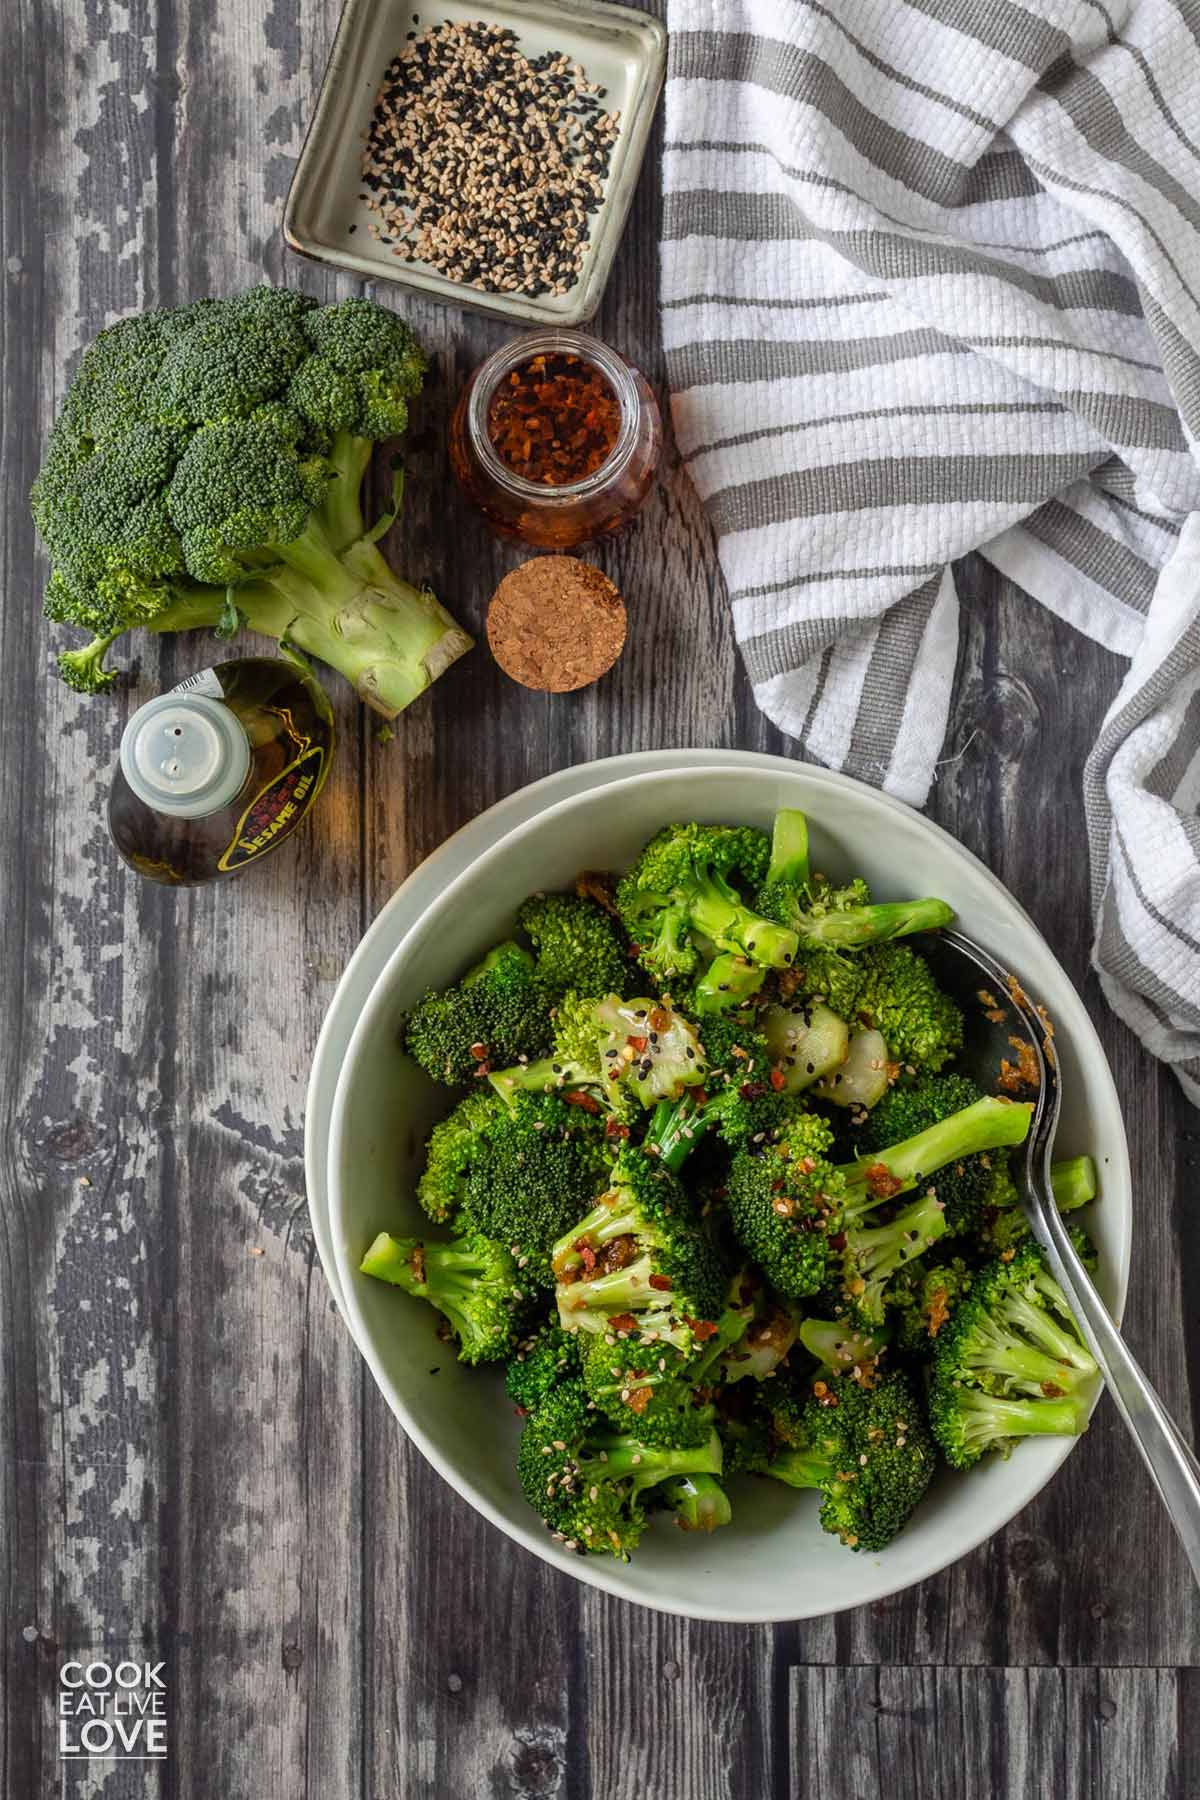 Asian broccoli on the table in a bowl with a bowl of sesame seeds, sesame oil, and a jar of chili oil